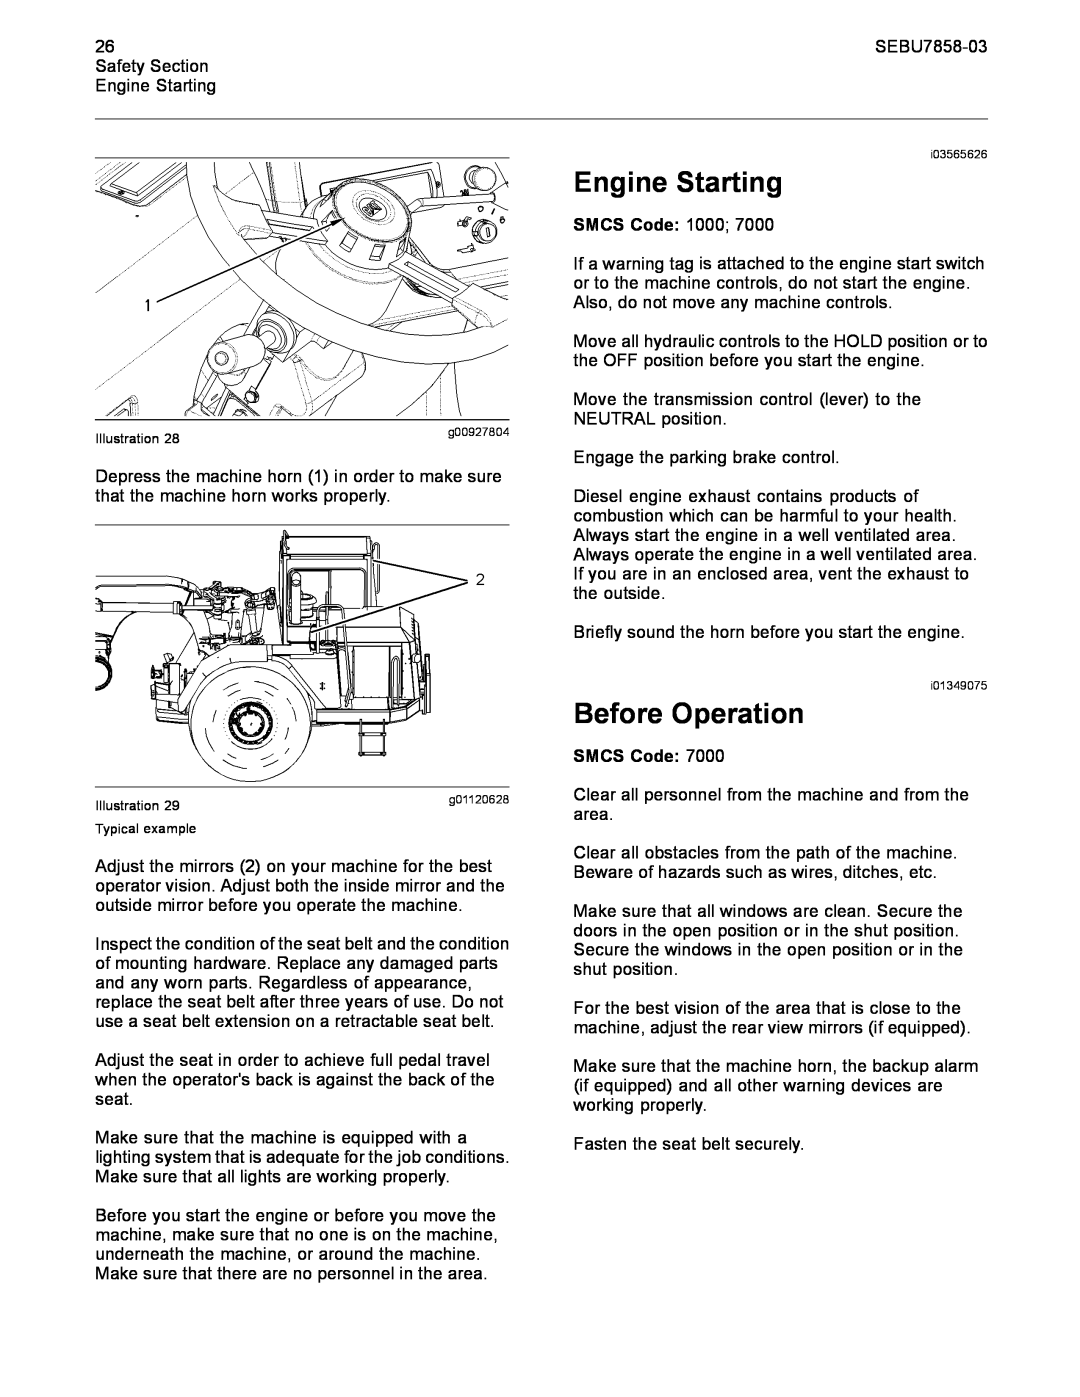 CAT 627G manual Engine Starting, Before Operation 